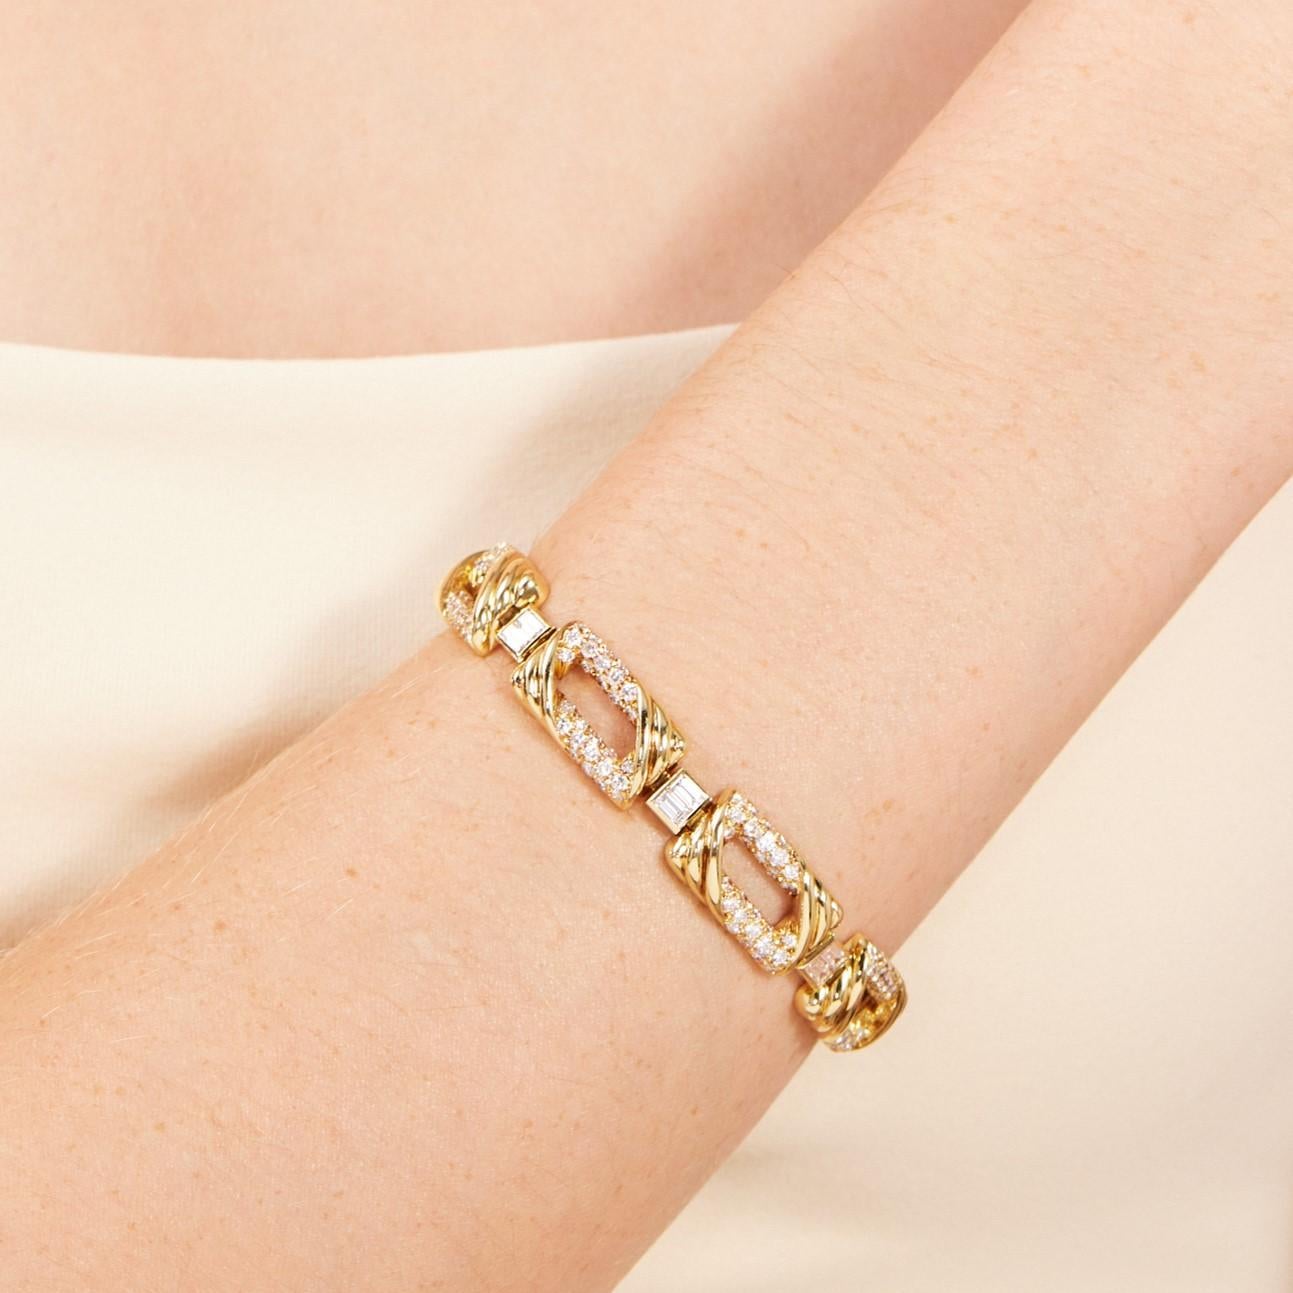 Mauboussin Paris Vintage Diamond Bracelet in 18K Yellow Gold   In Excellent Condition For Sale In Dallas, TX